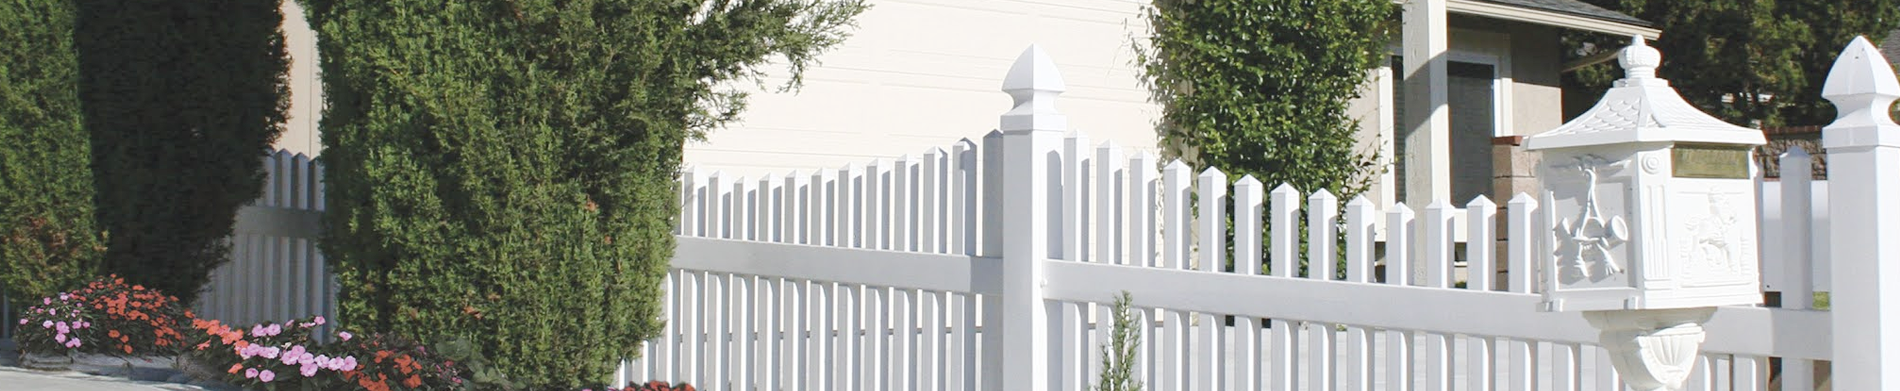 Celebrate Christmas with your family inside your home – Install a vinyl fence around it